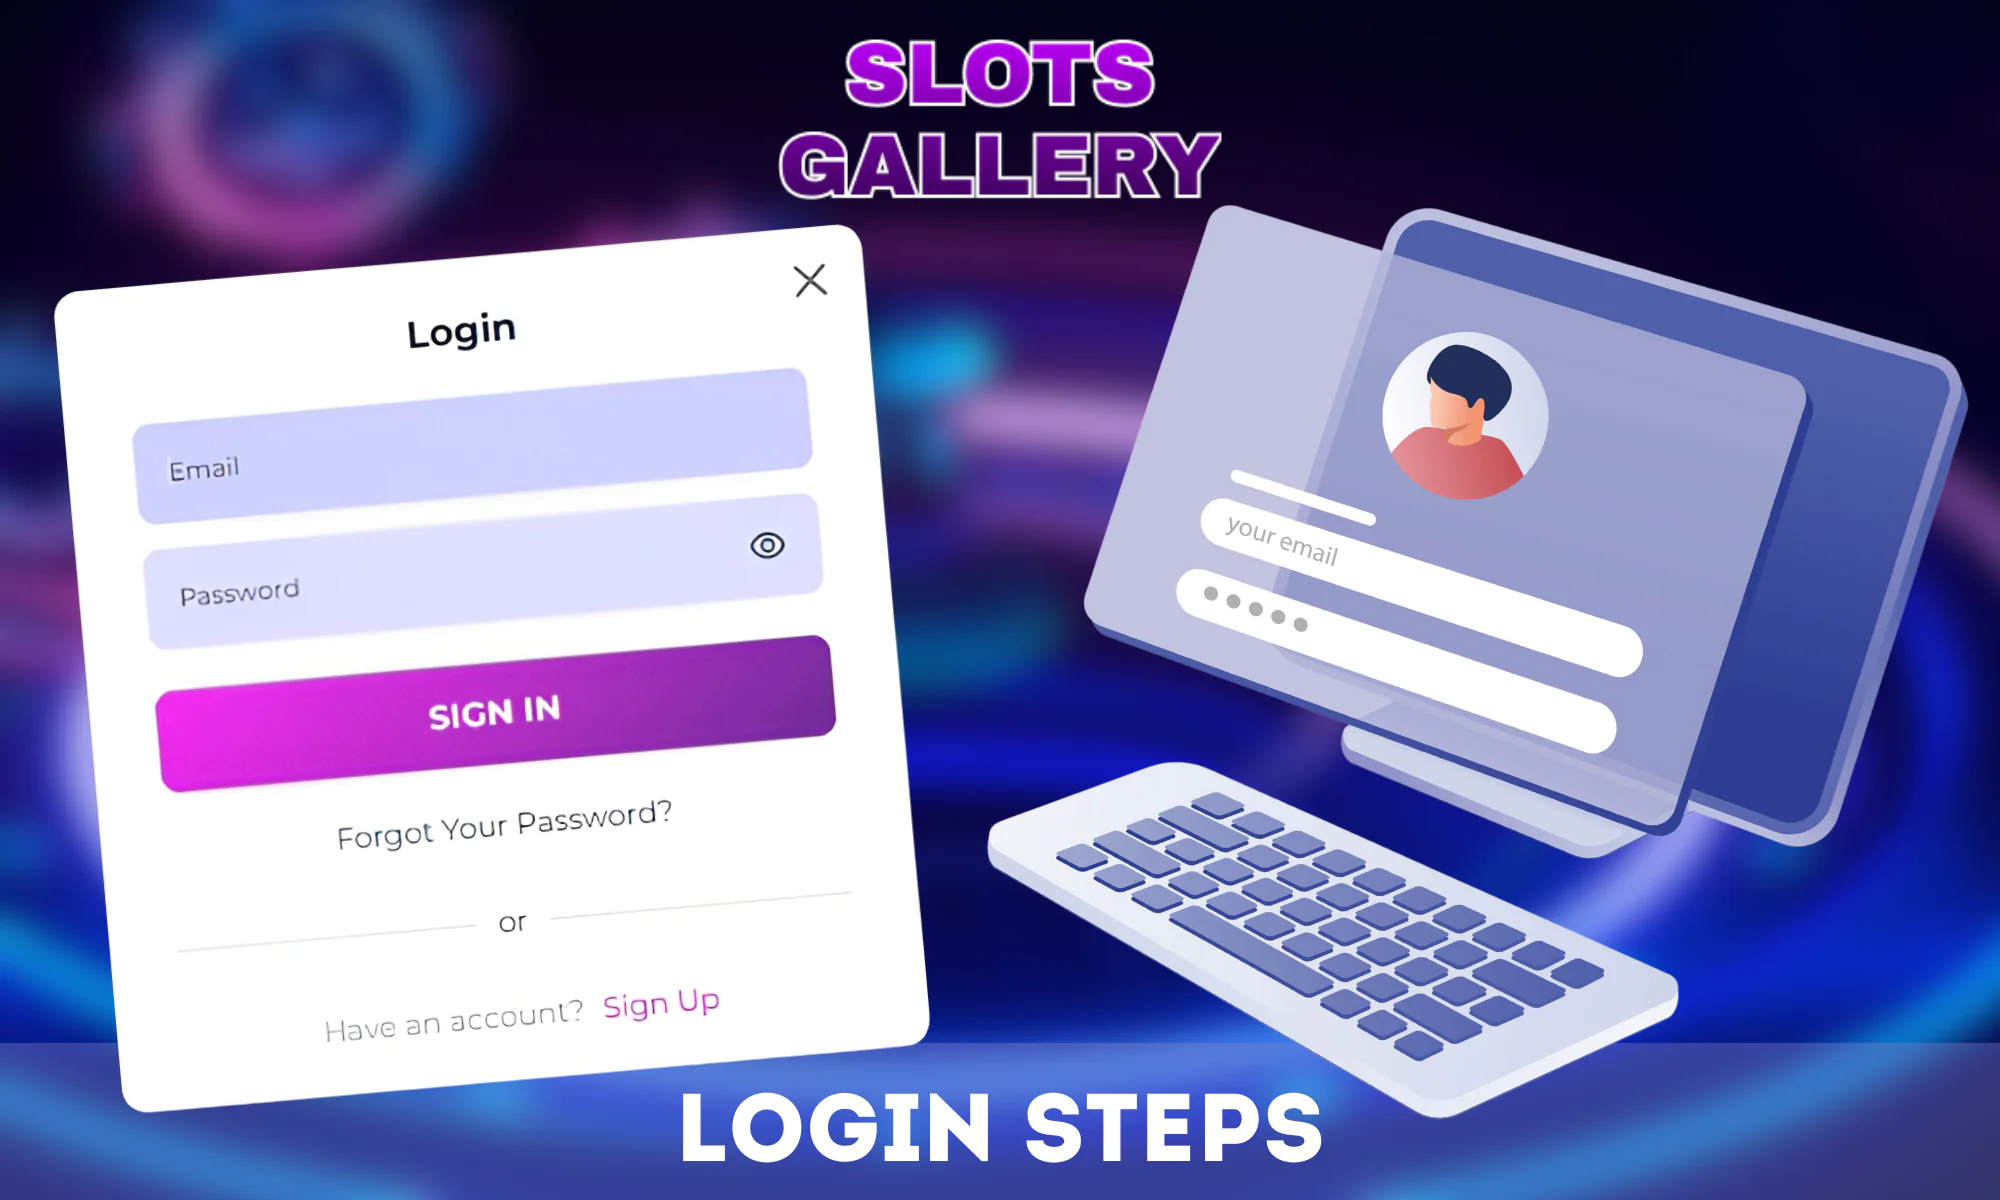 How to log in to your Slots Gallery account